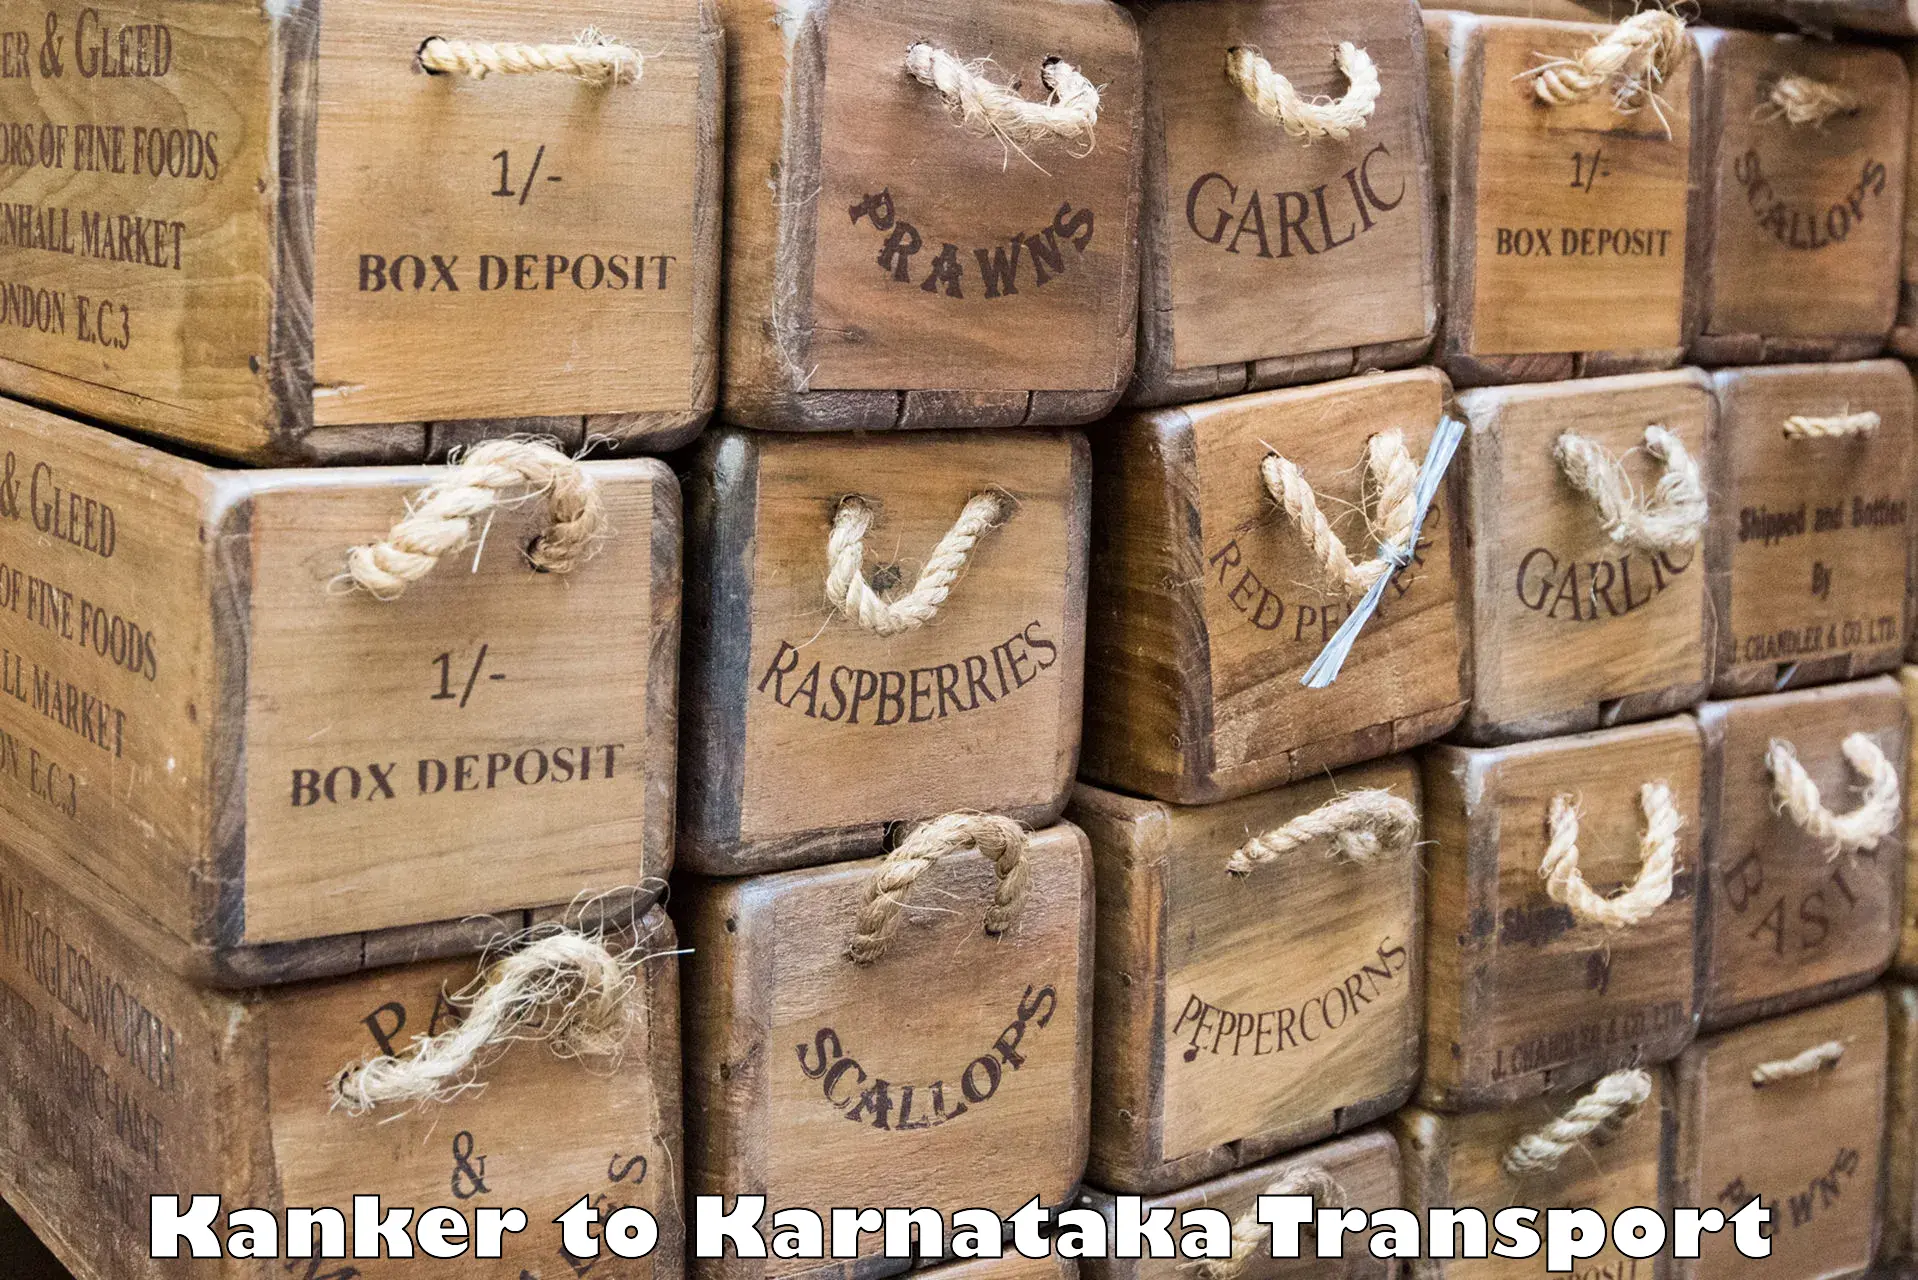 Truck transport companies in India Kanker to Yellapur